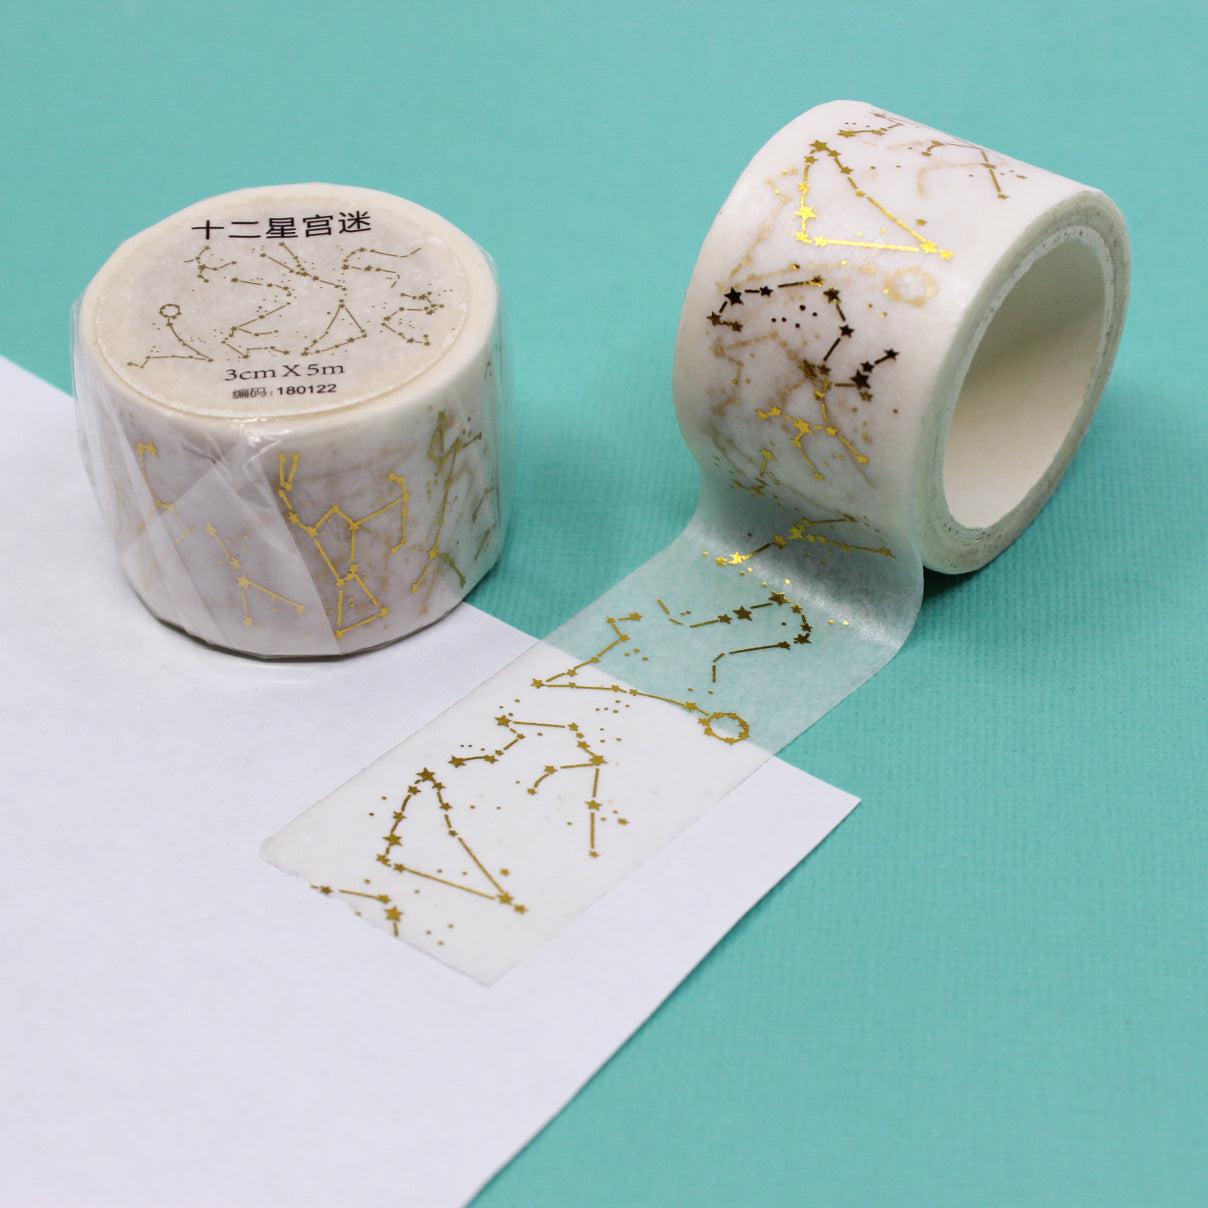 Illuminate your projects with our Wide Gold Foil Starry Night Sky Constellation Washi Tape, adorned with shimmering constellations in a luxurious gold finish. Ideal for adding a touch of celestial wonder to your crafts. This tape is sold at BBB Supplies Craft Shop.